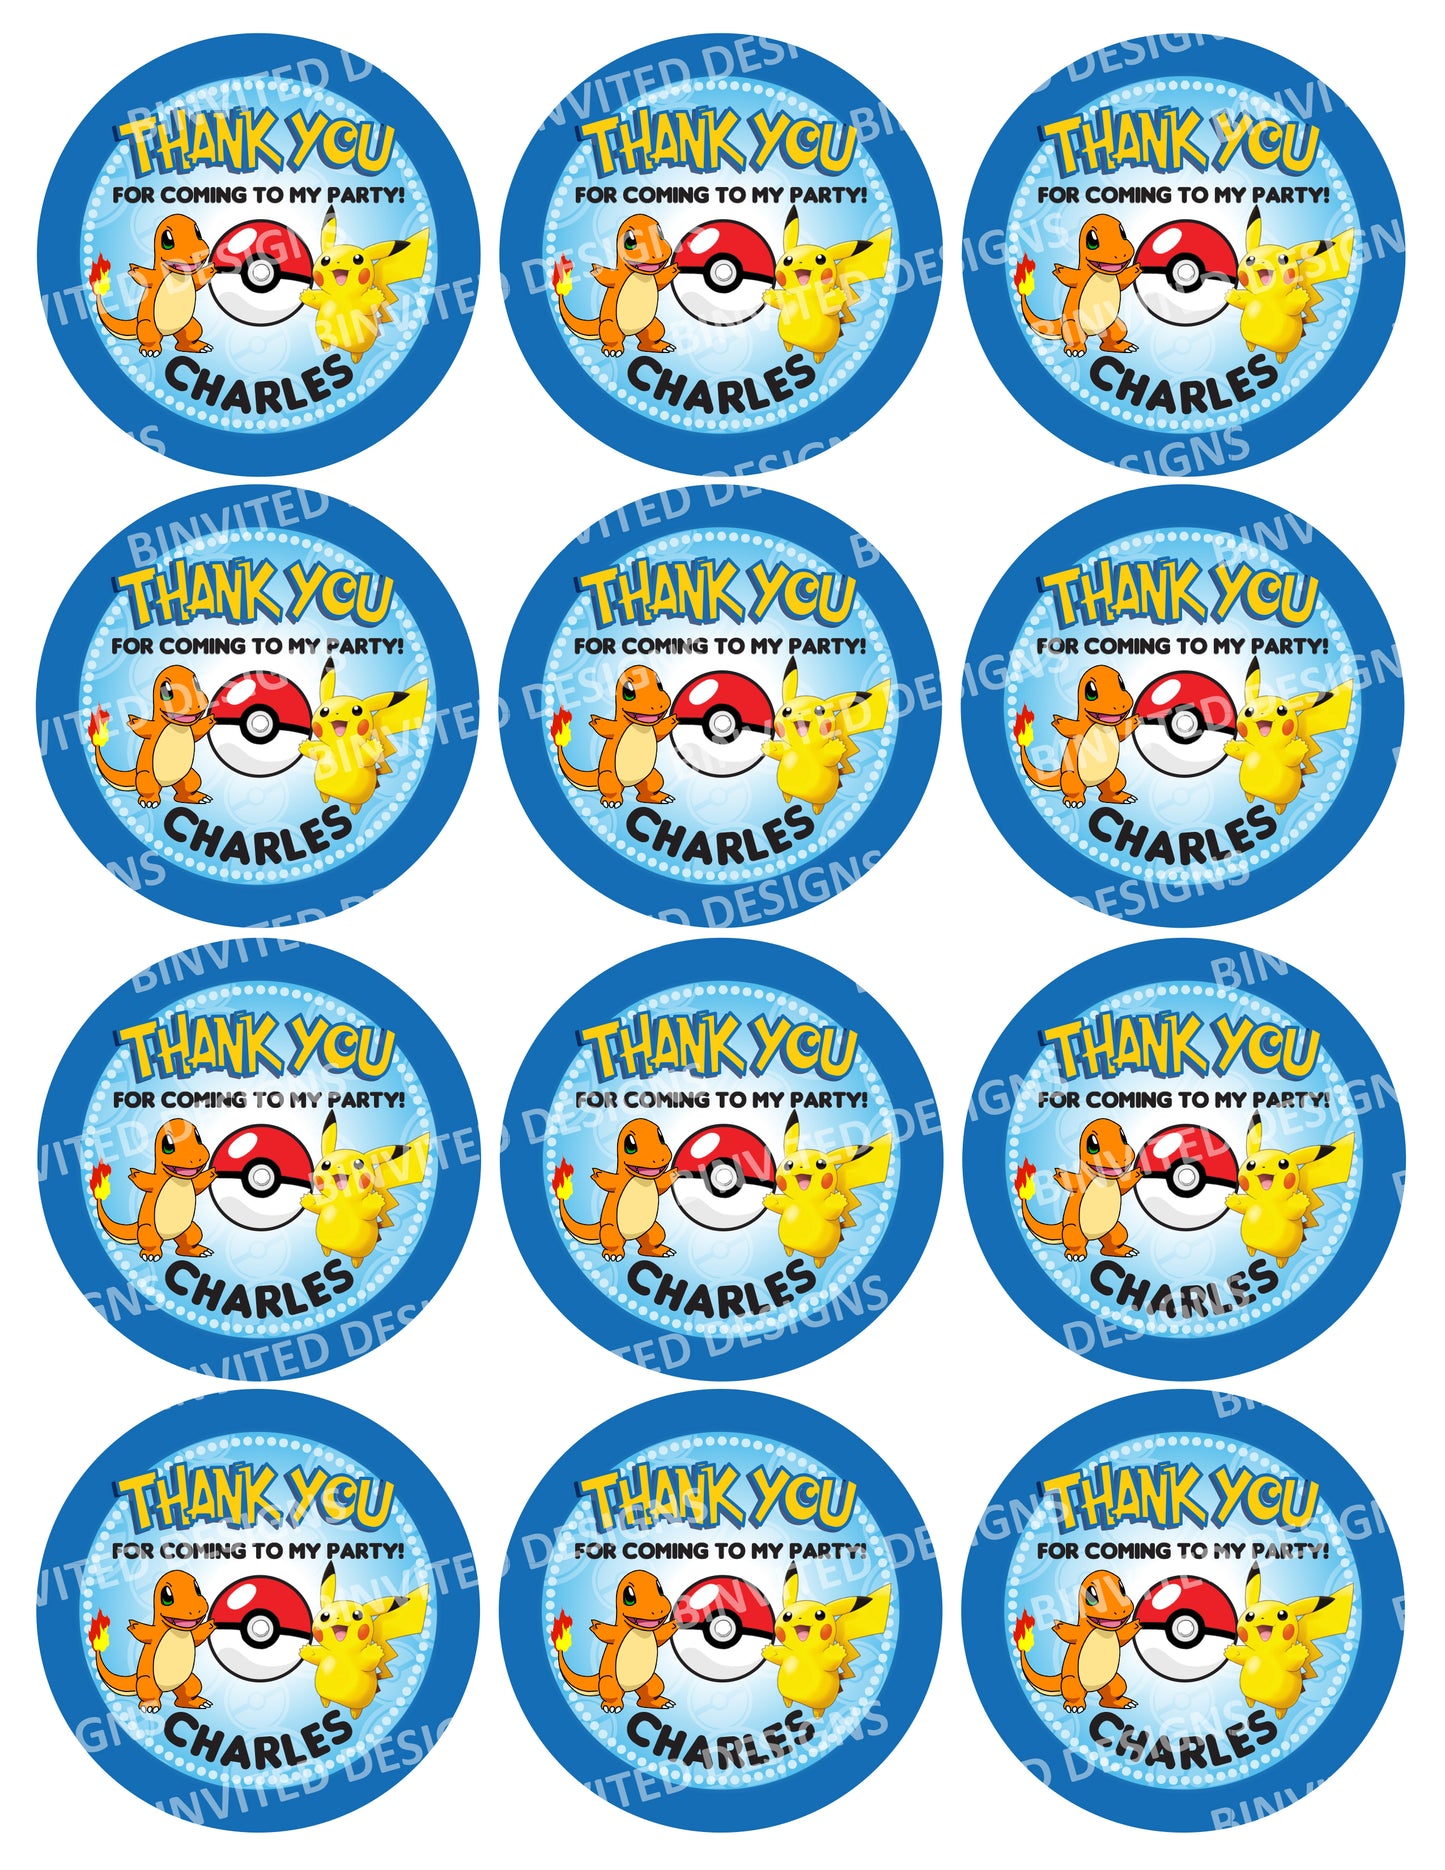 POKEMON Party Digital or Printed Custom Stickers for Gift Bags, Party Favors! Charizard and Pikachu!